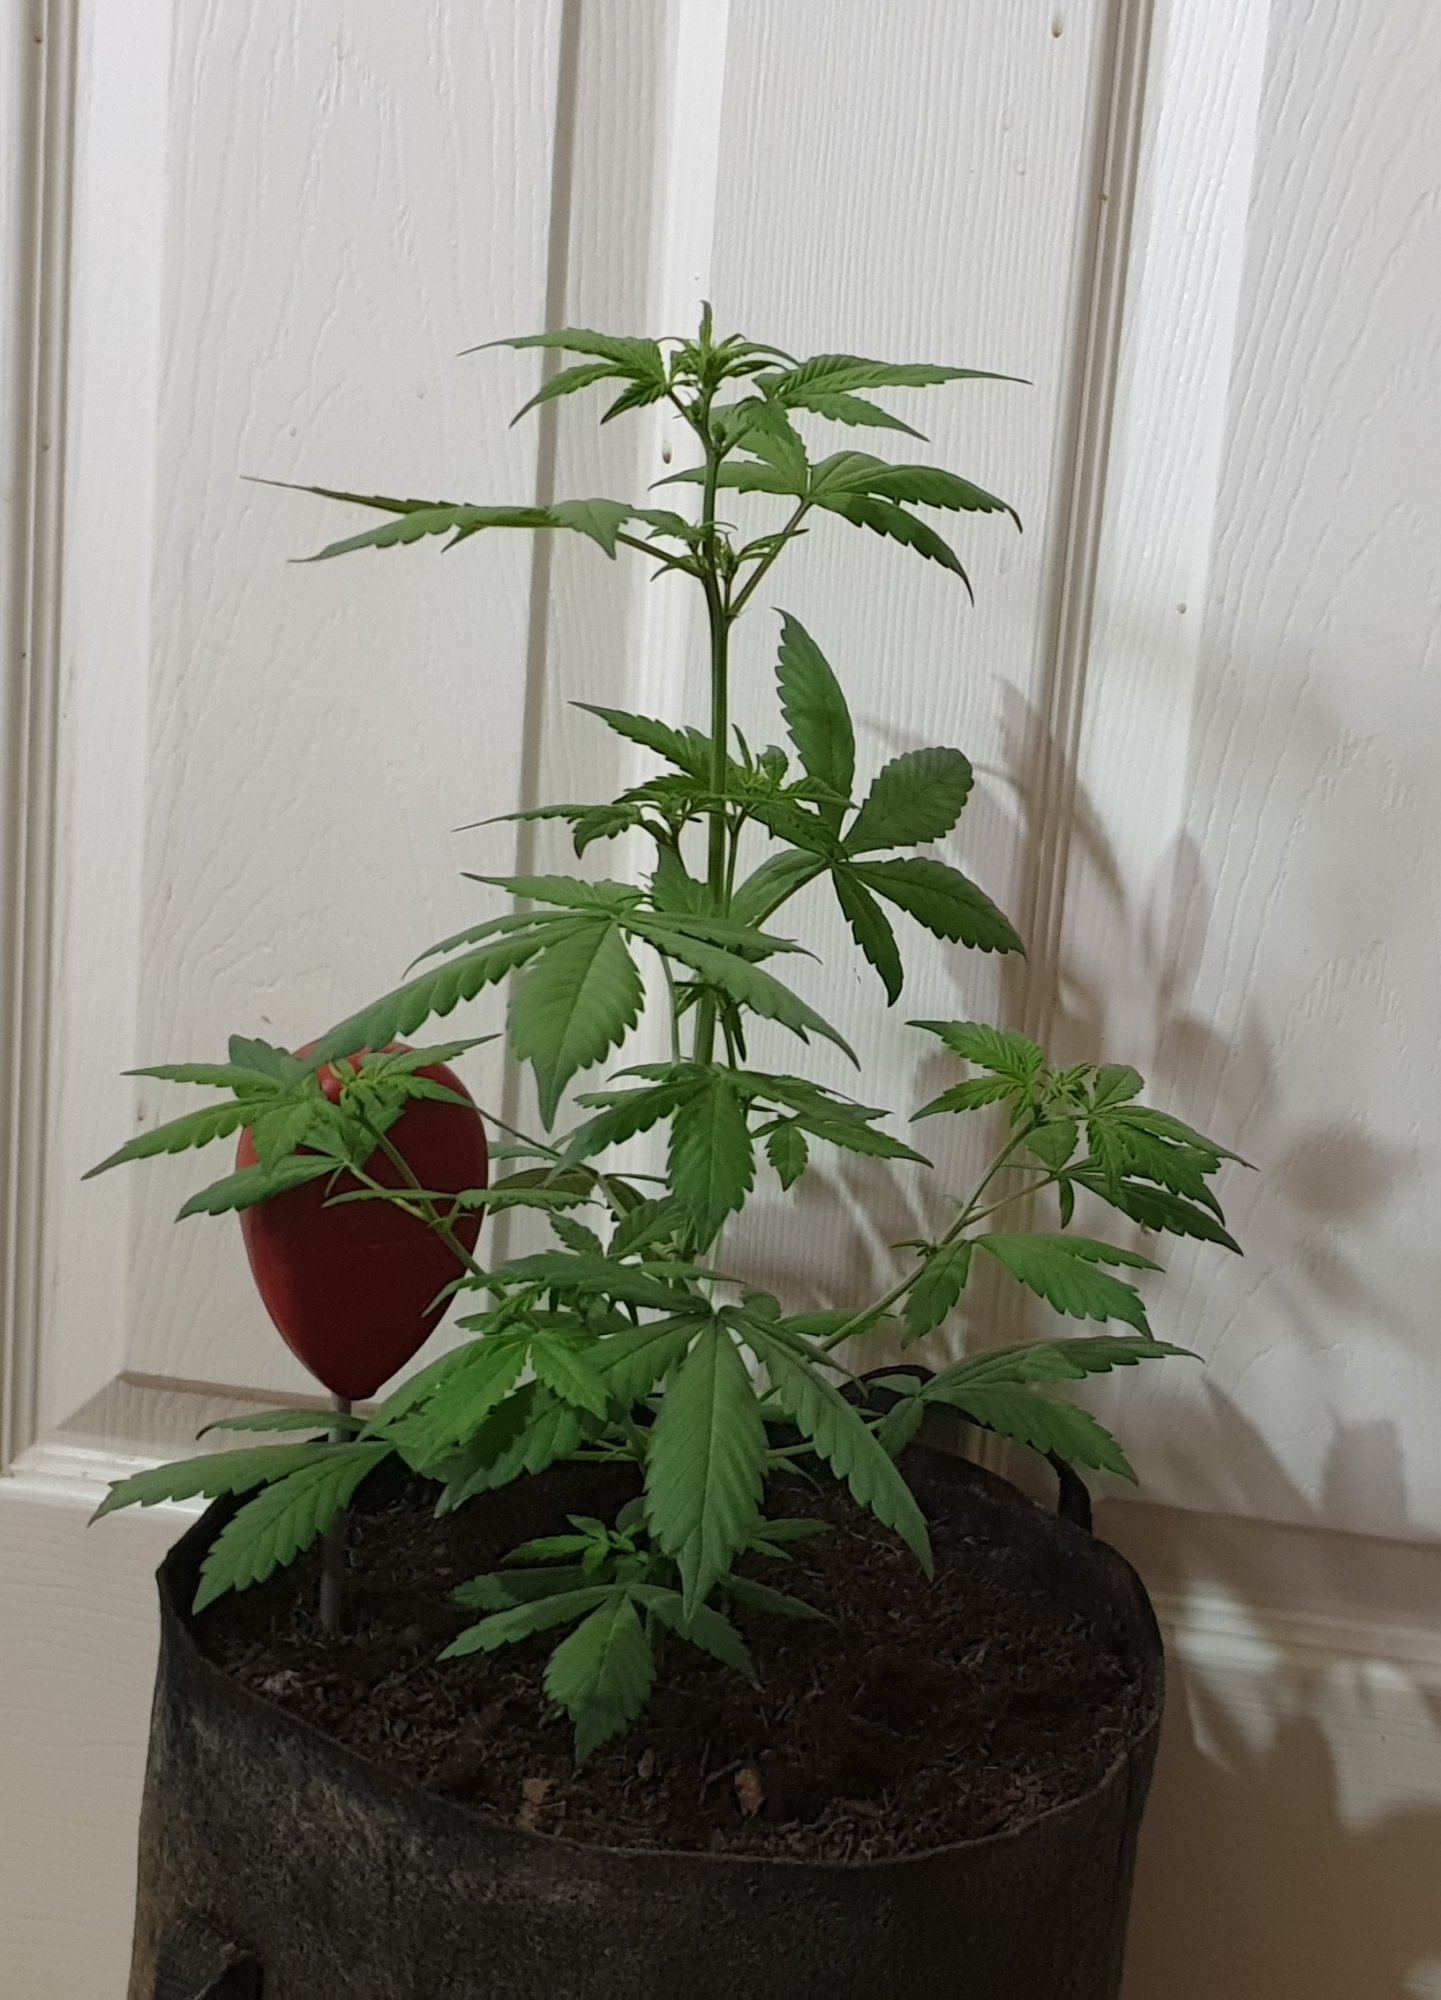 Lsd 25 autoflower  is she stretching 2